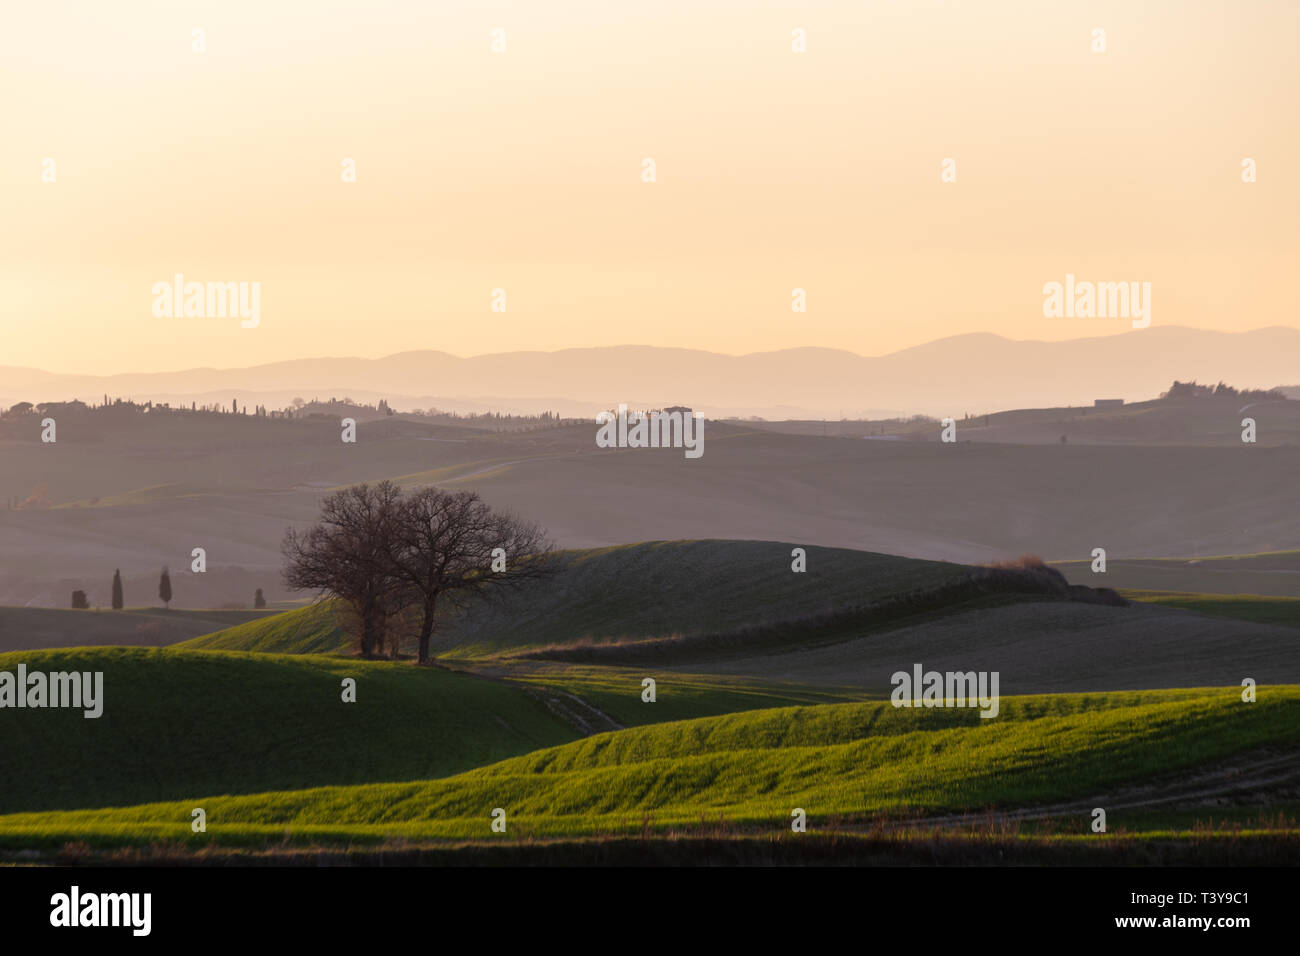 Beautiful view of Tuscany landscape hill at sunset, with mist and warm colors Stock Photo